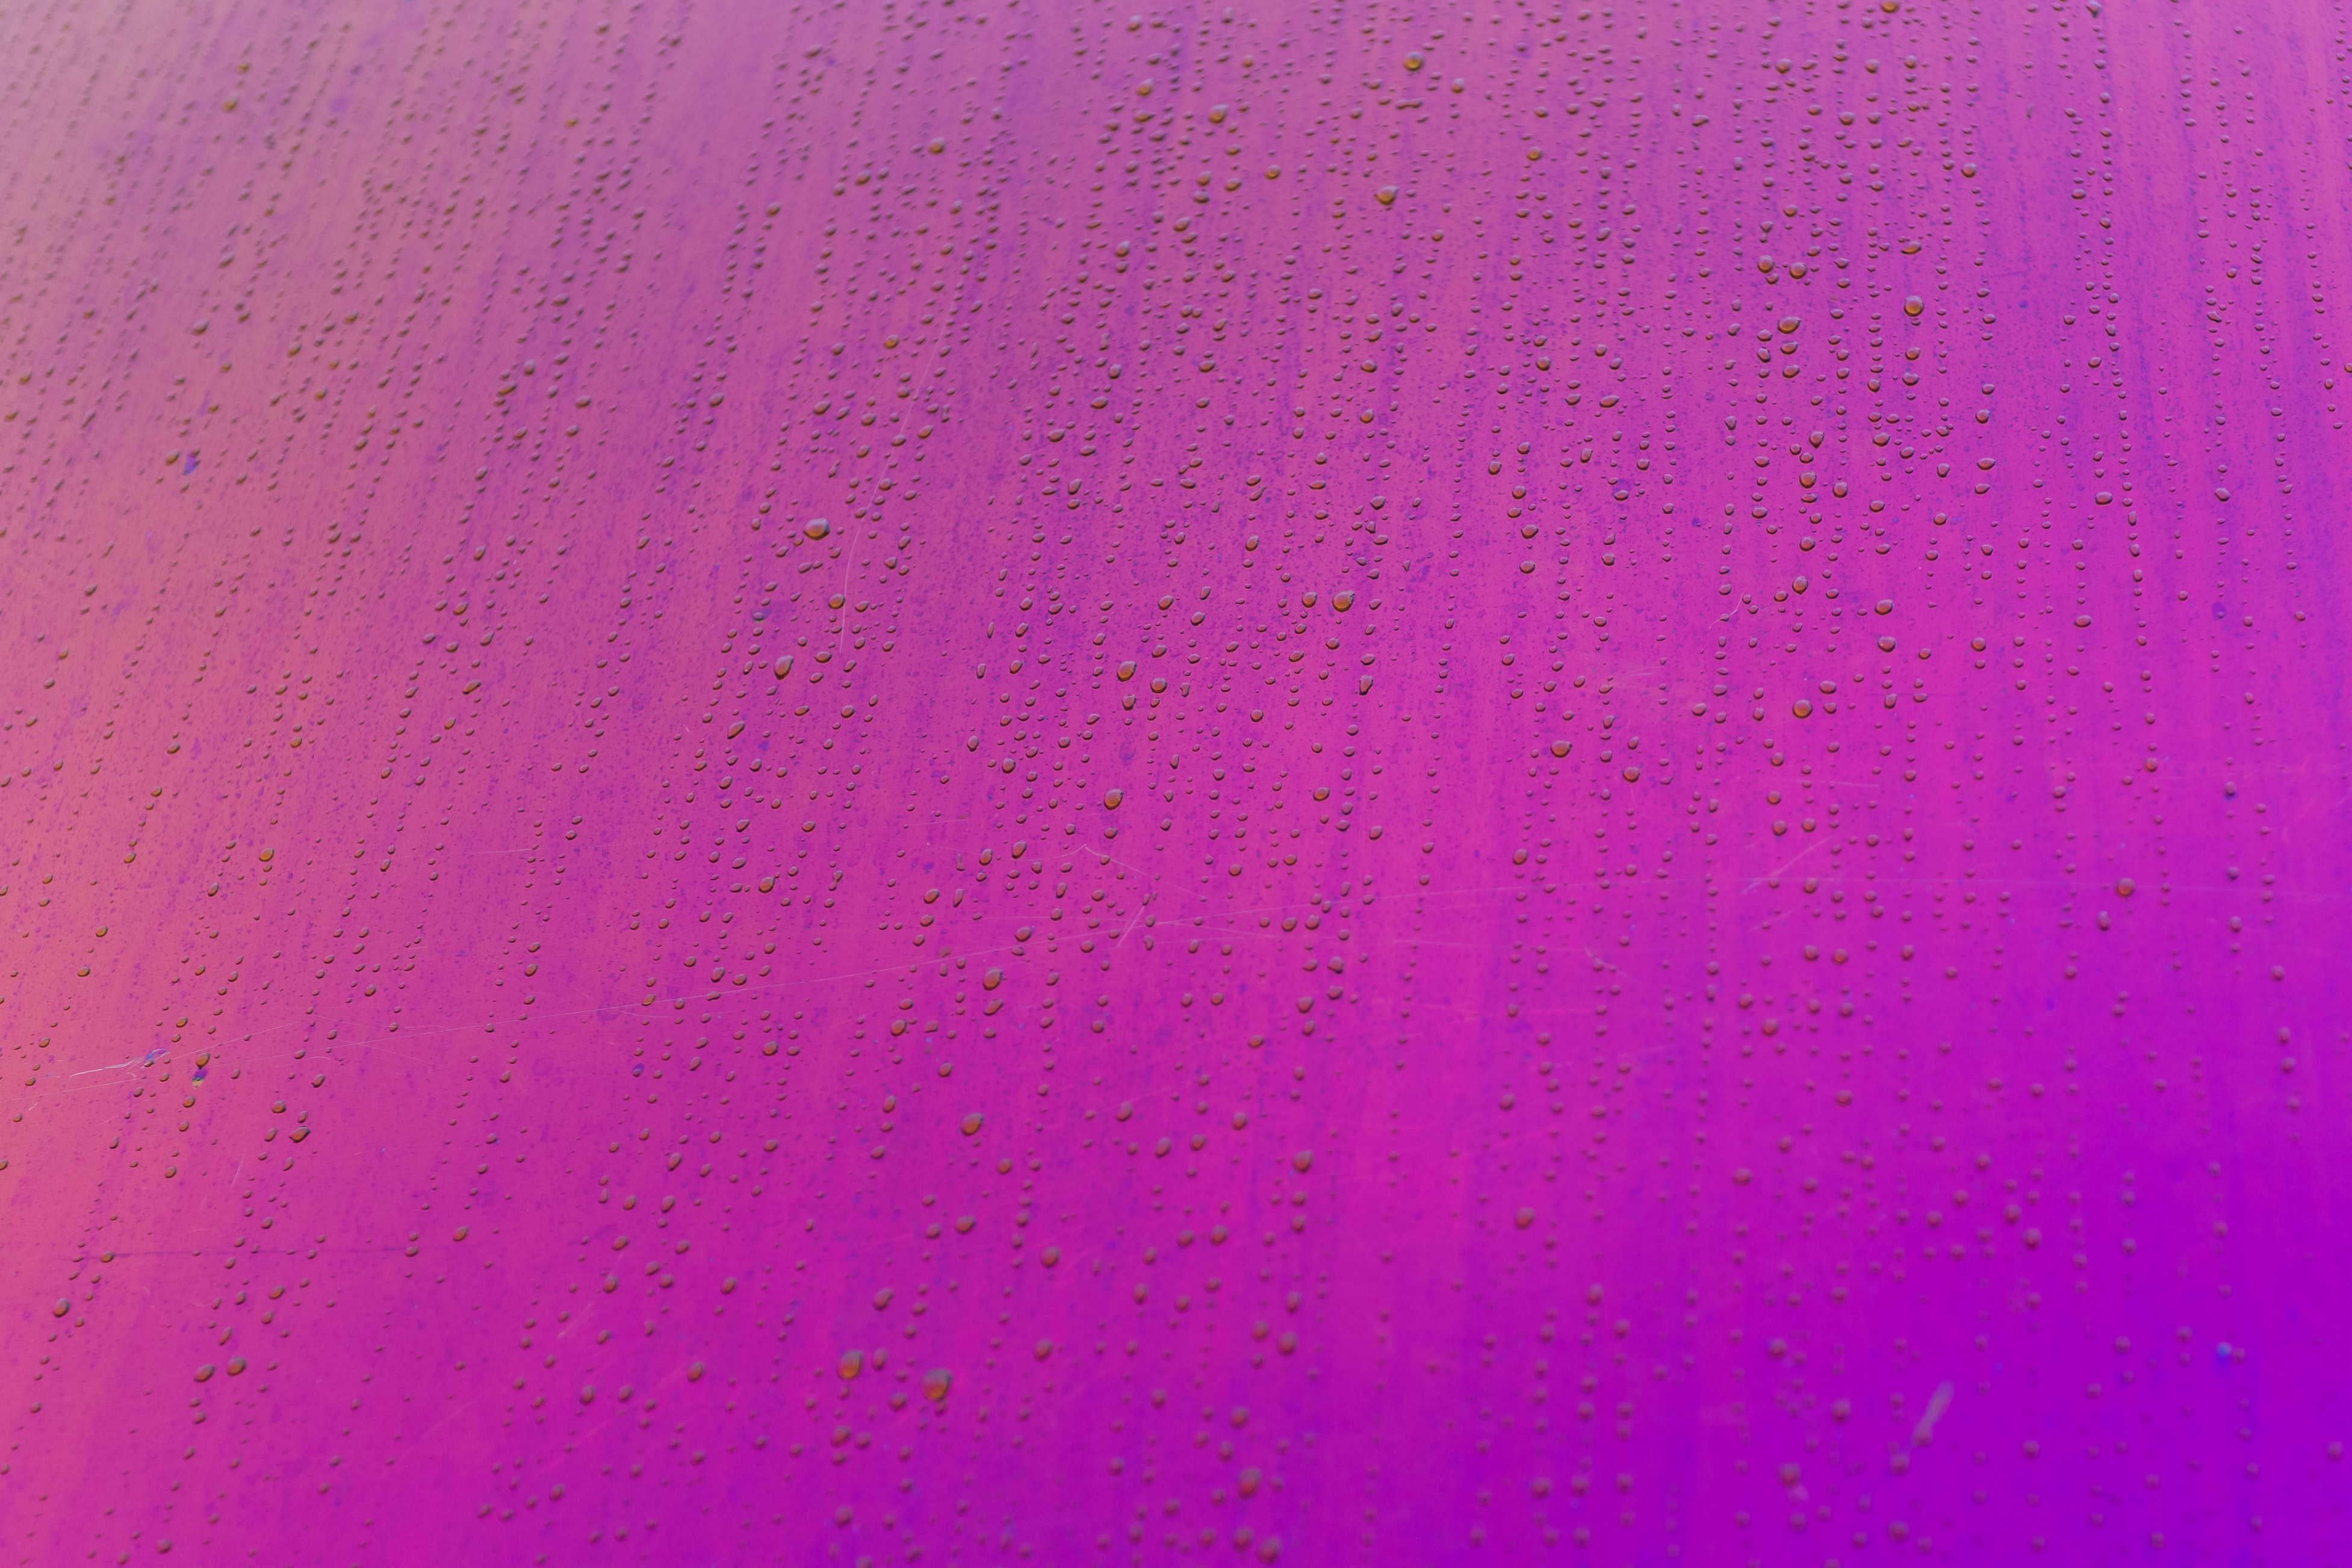 Phone Background Full HD surface, texture, drops, textures